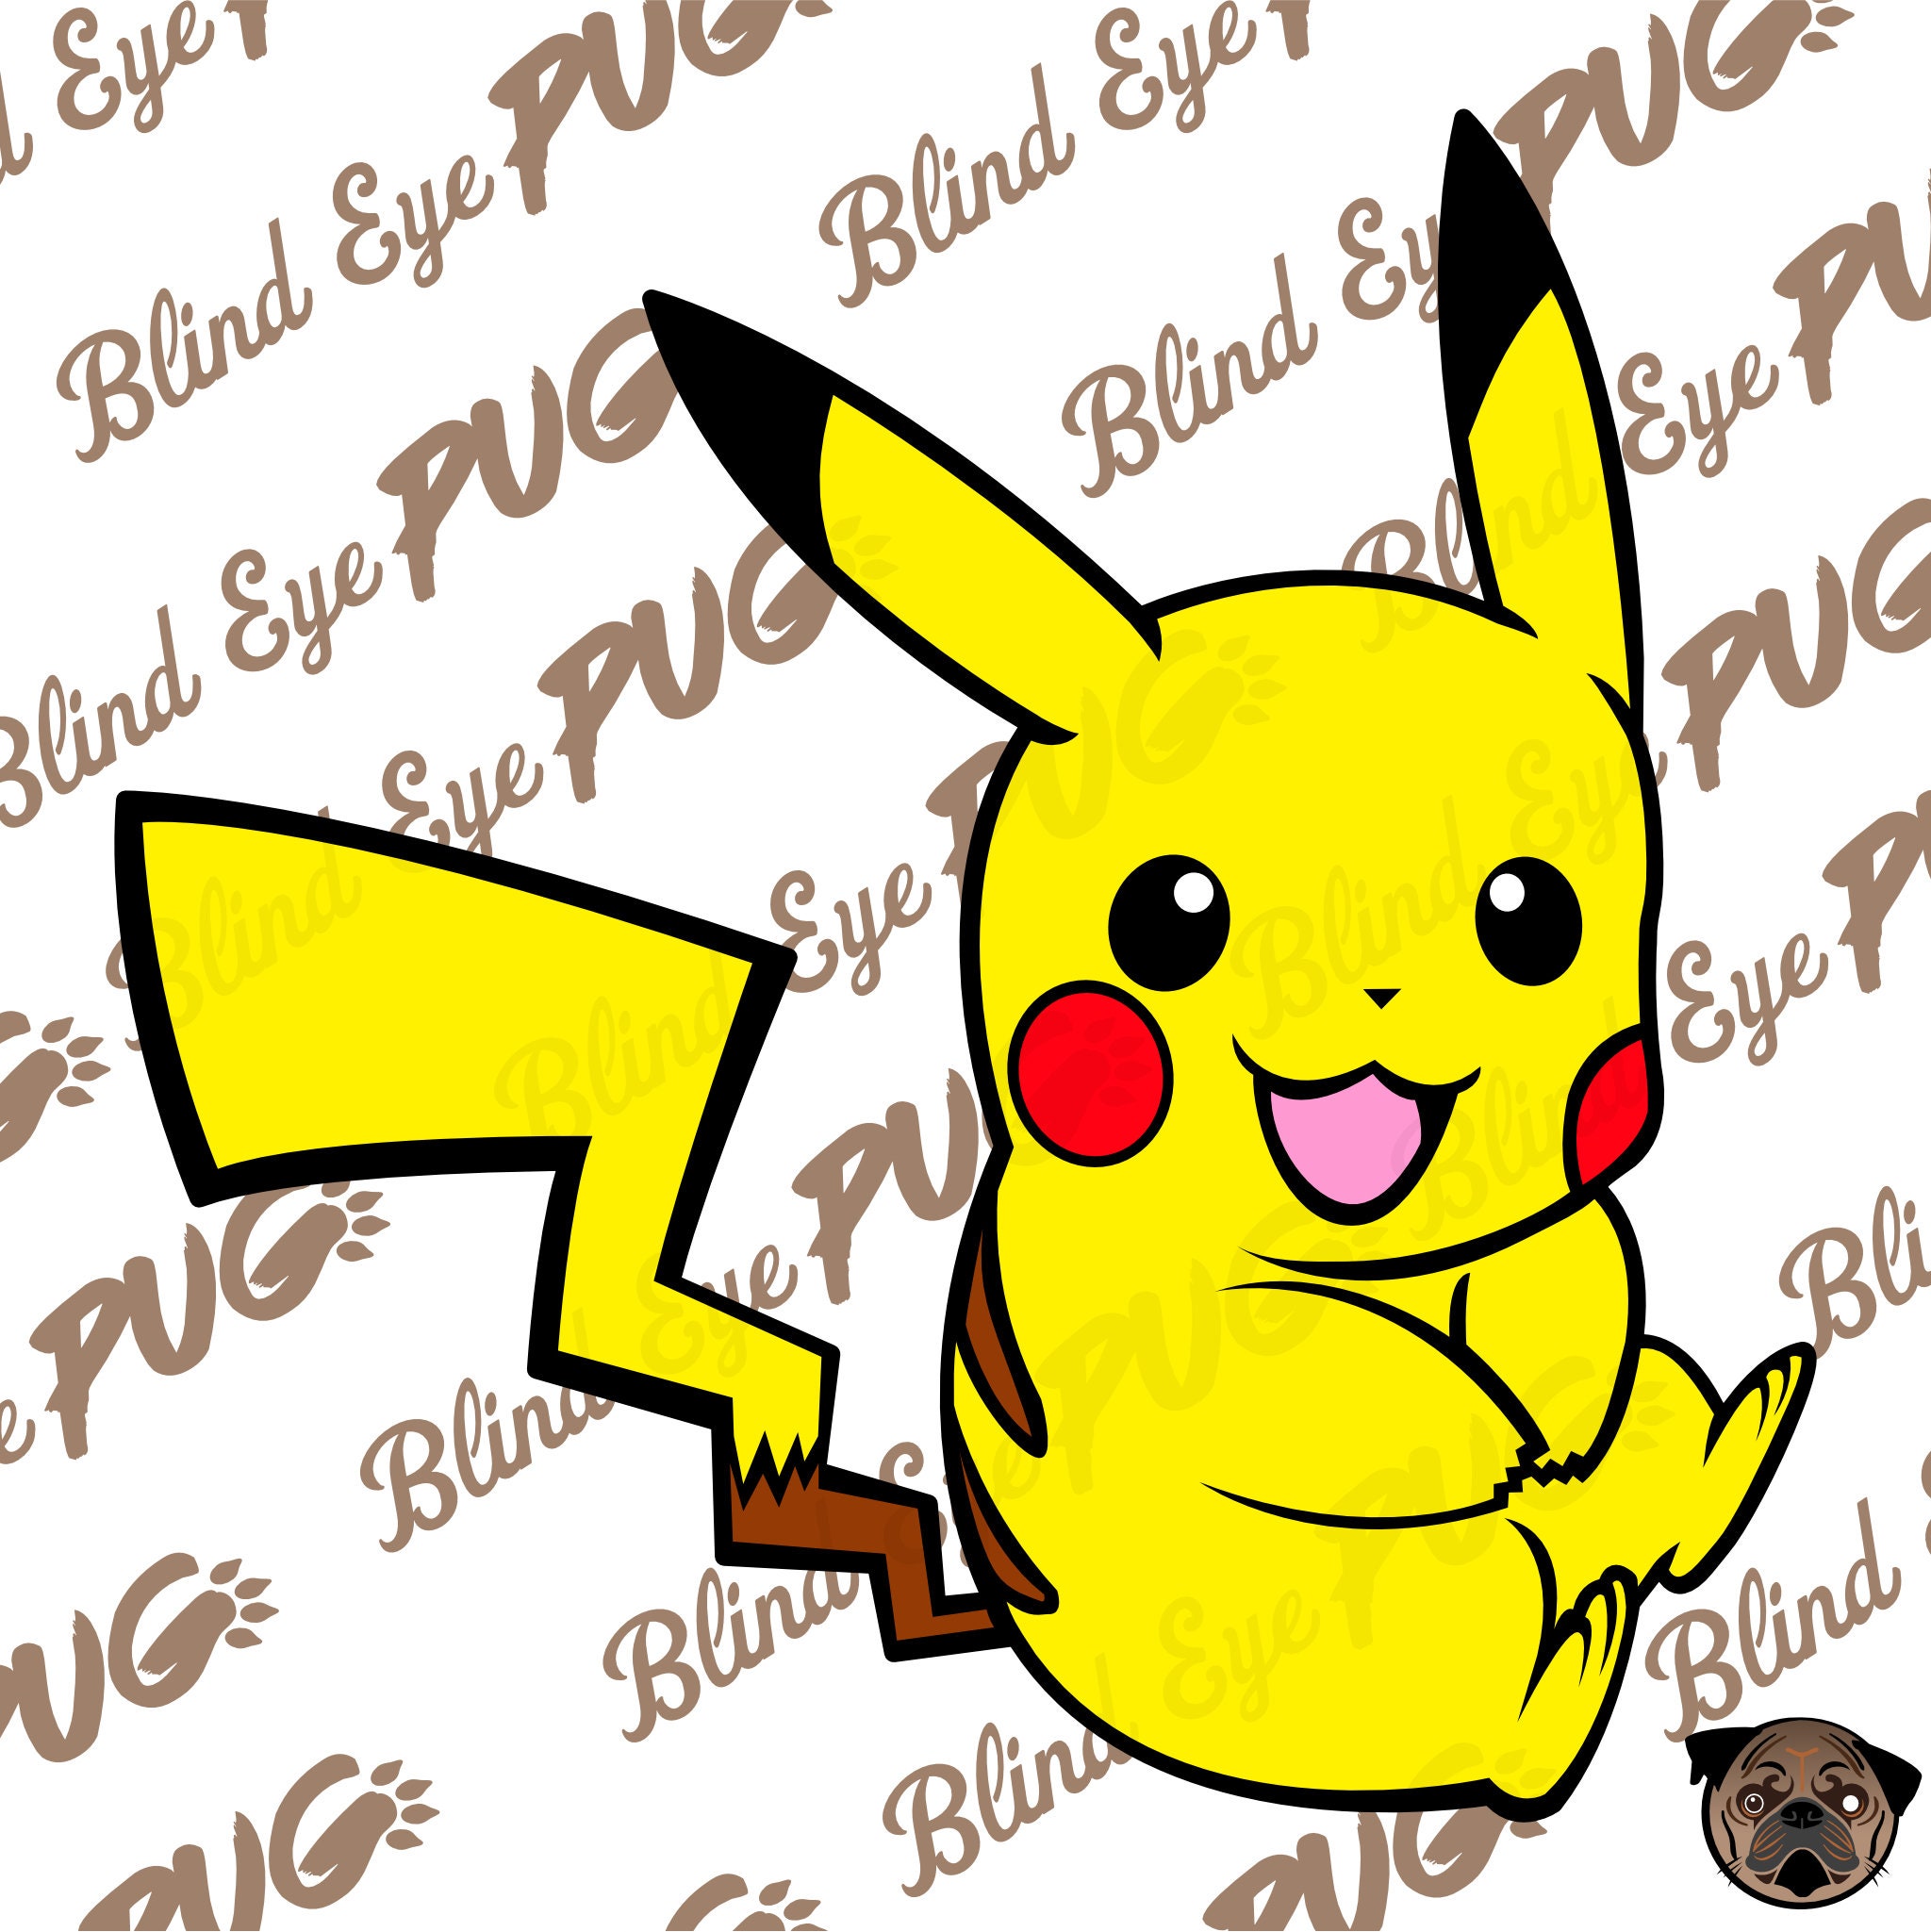 Eevee SVG Layer, Pokemon, Smash brother, Eevee, Pikachu, Ashe,catch them  all,Pokémon themed party, car decal,sticker,sword,sheild